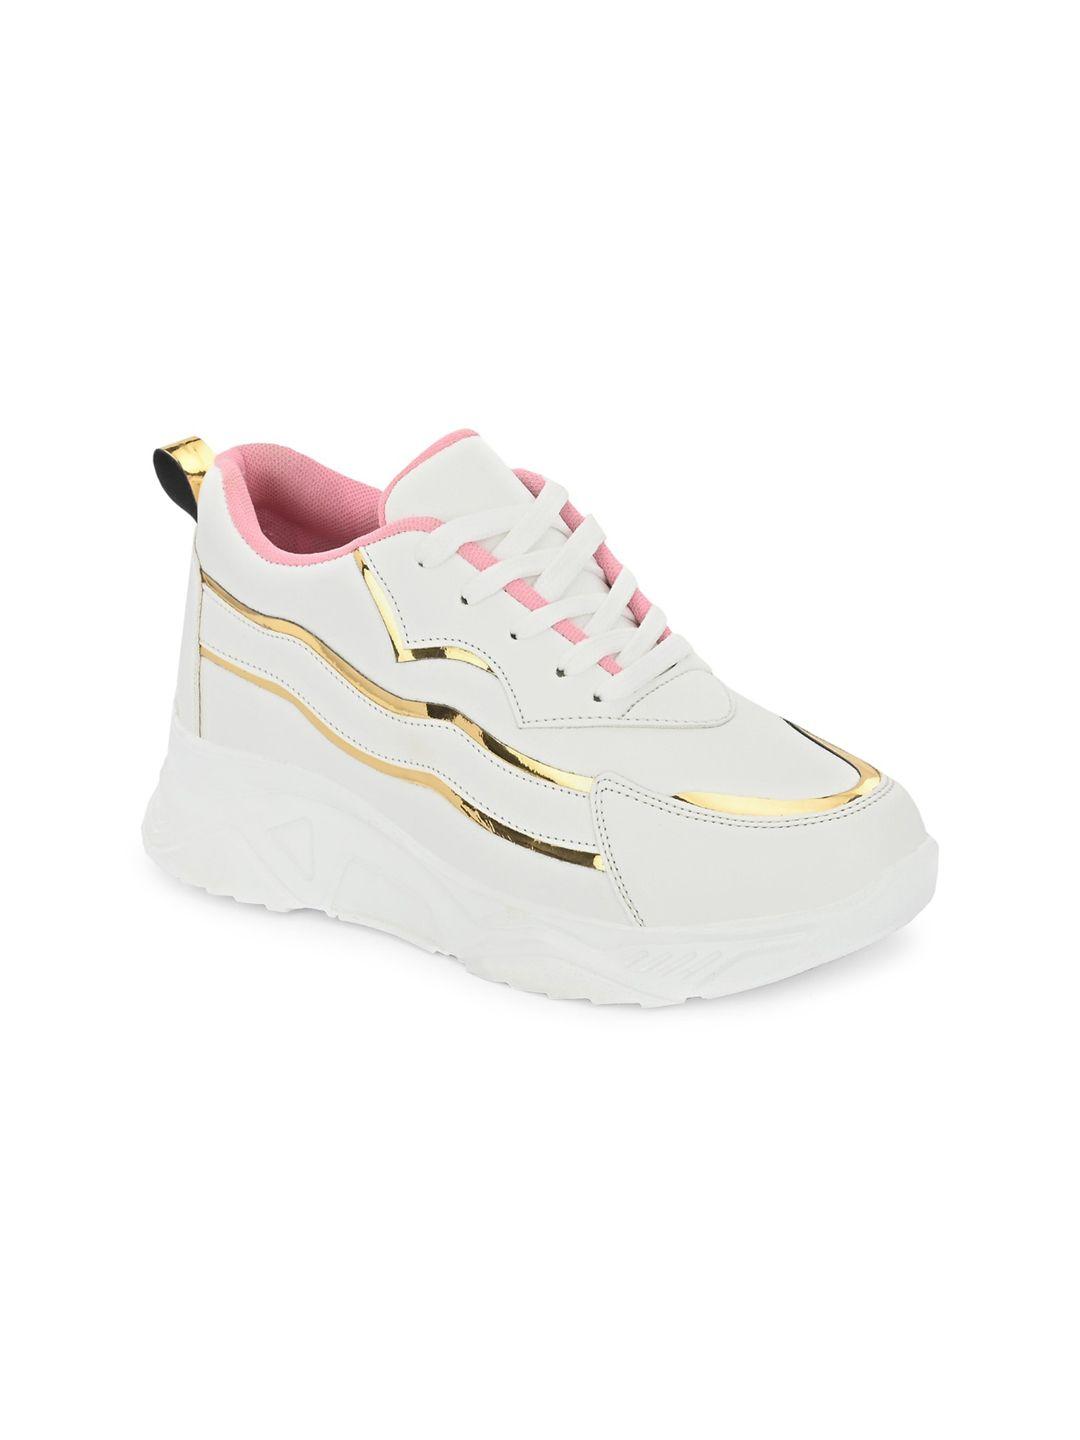 dressberry women white and gold-toned lightweight sneakers